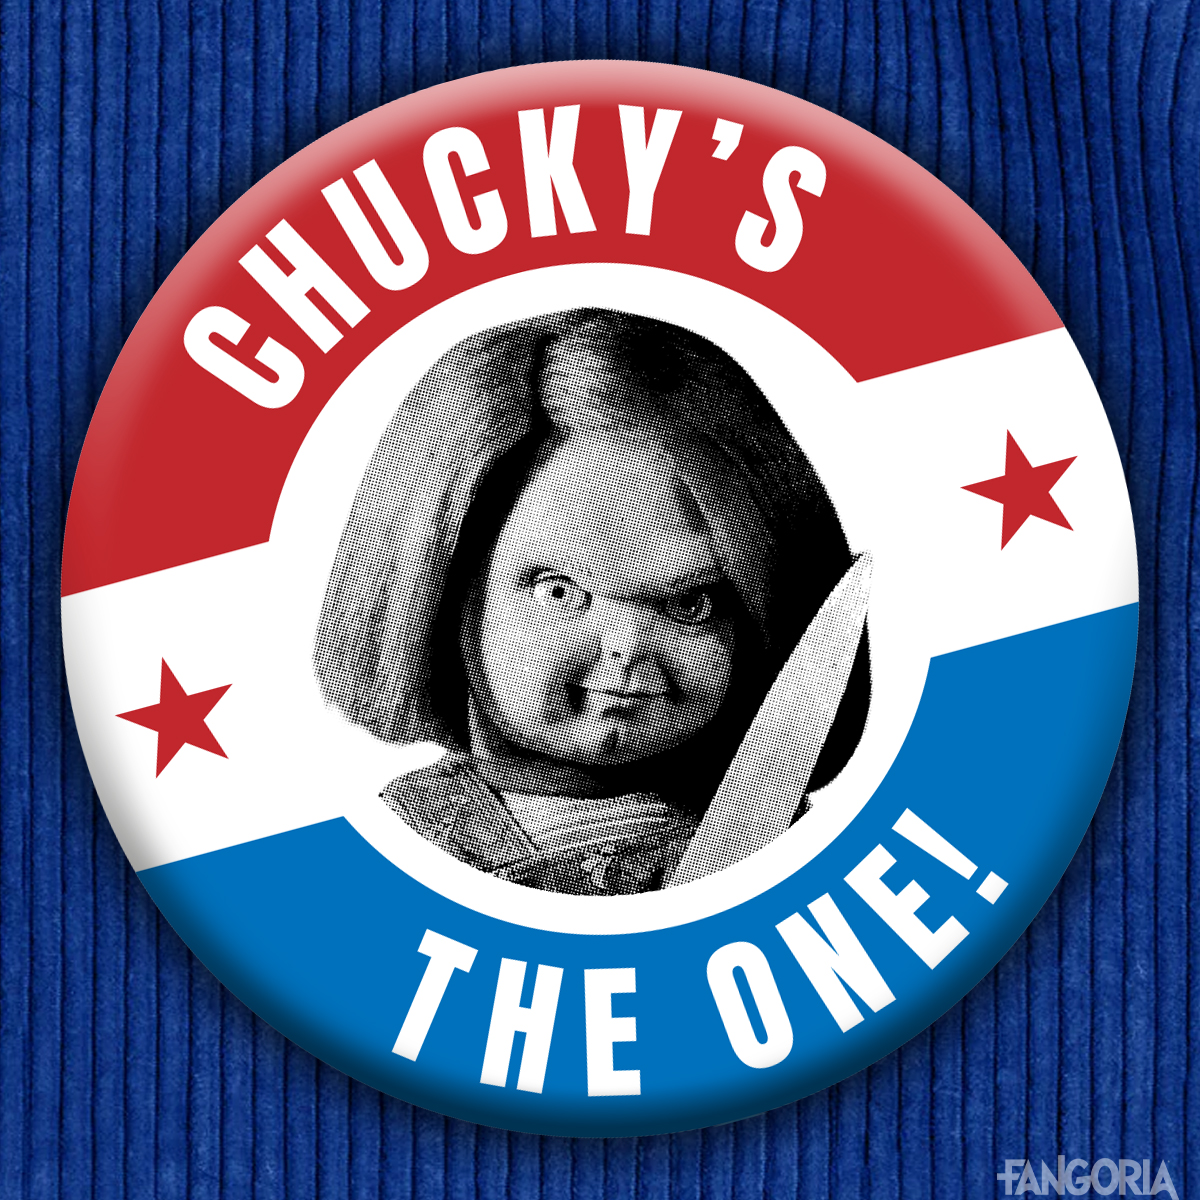 It's time to stand with #CHUCKY in these troubling times. He's been there for us, now it's our time to stand up and get behind someone who shares our values. Call 1-201-500-3347 right now!